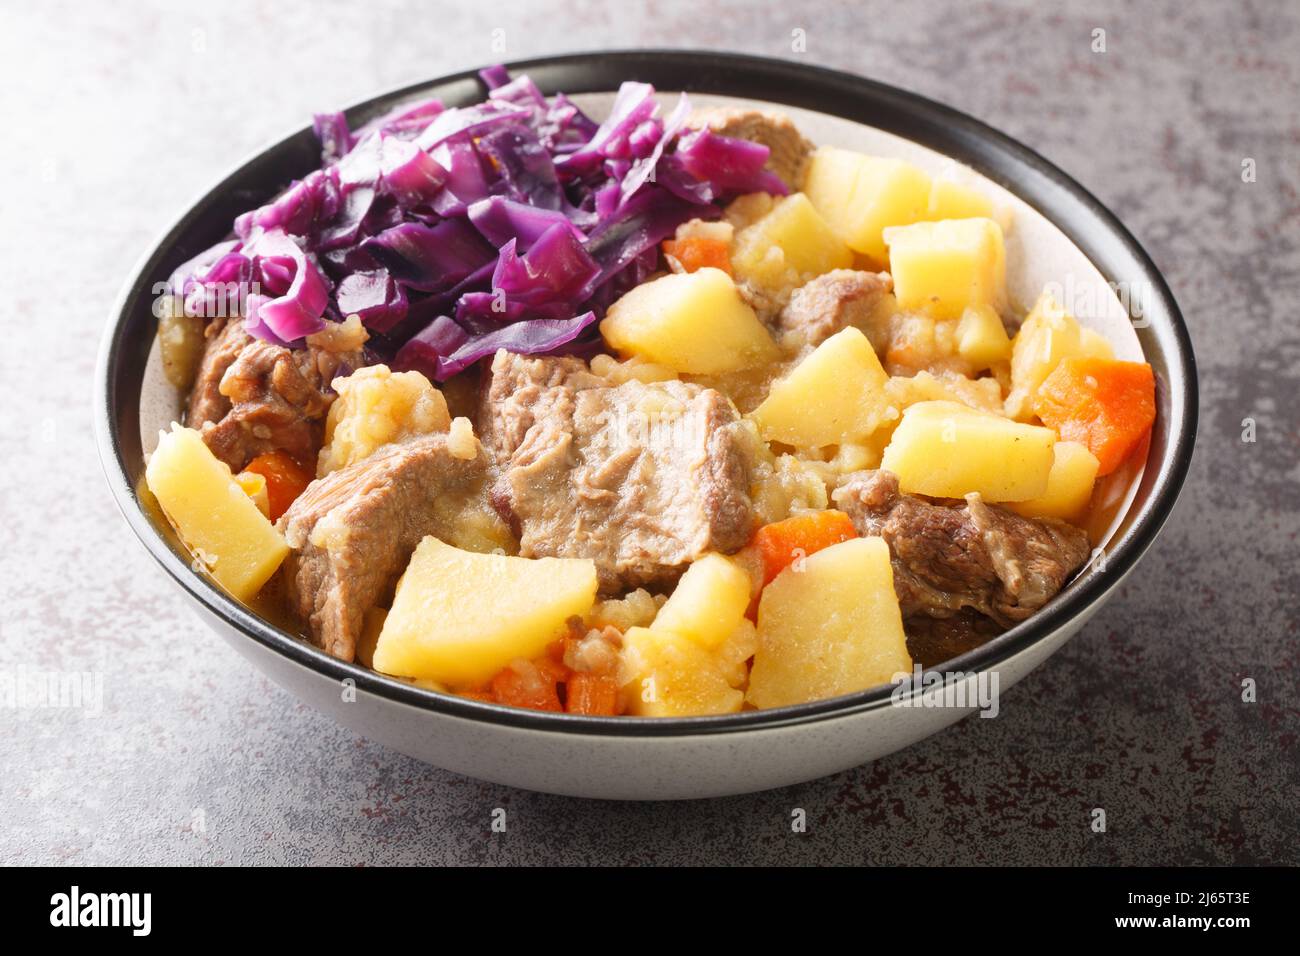 Scouse is a stew with meat and vegetables served with pickled cabbage close-up in a plate on the table. Horizontal Stock Photo